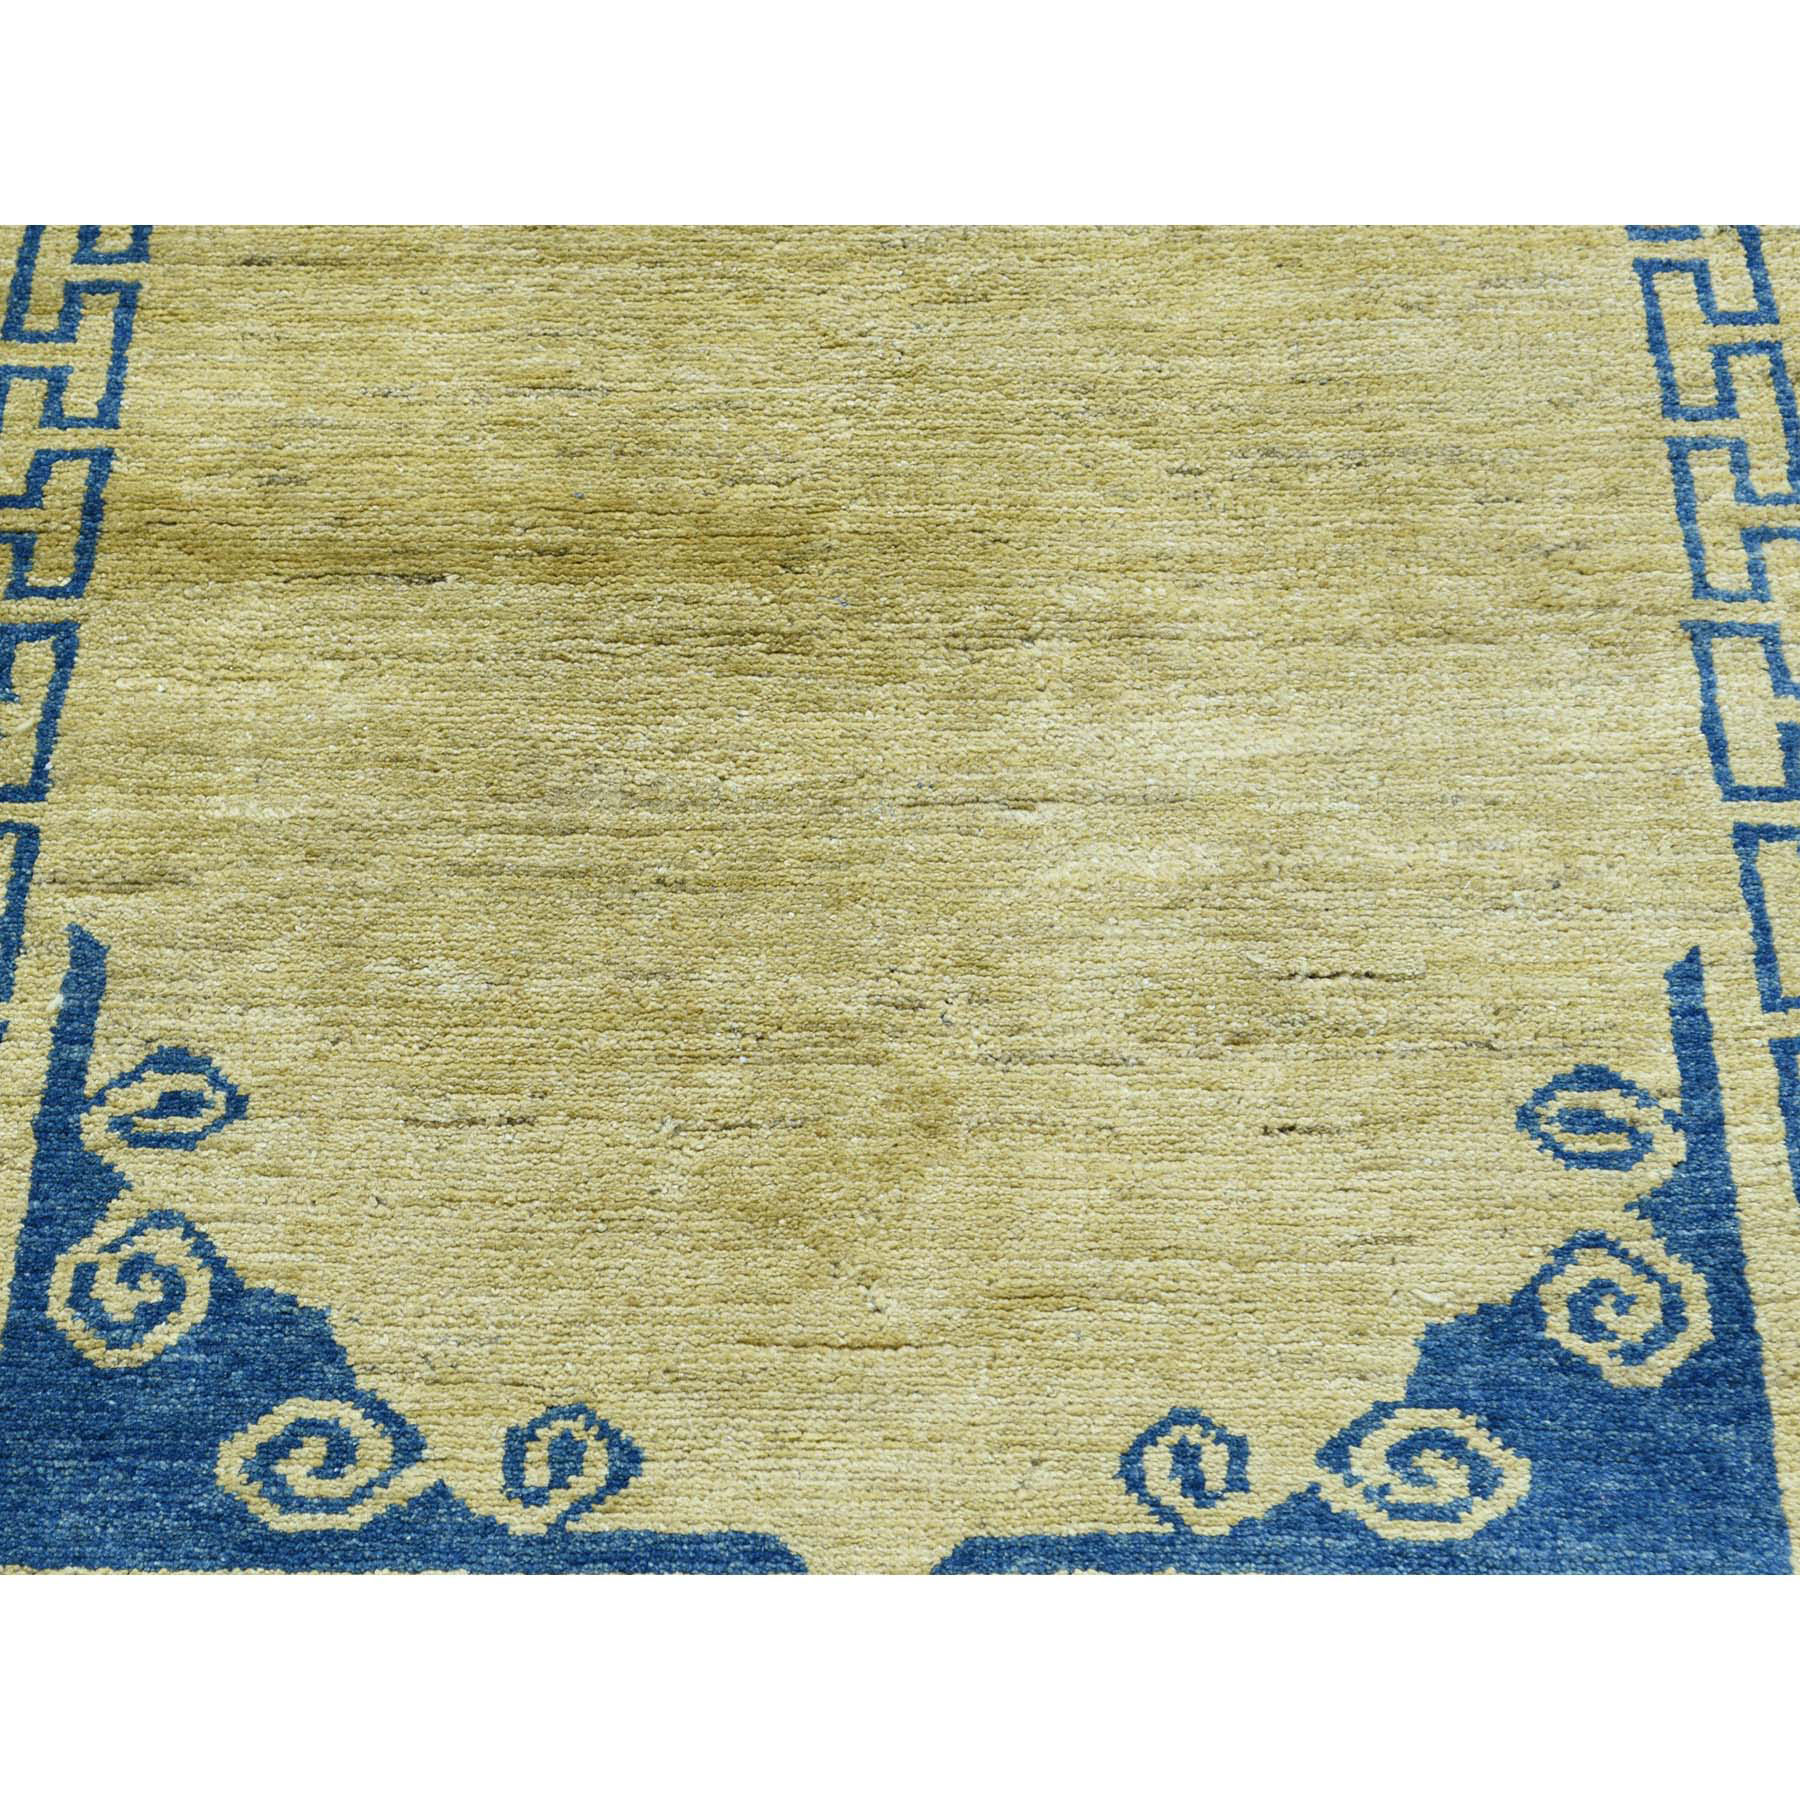 2-9 x4-1  Hand-Knotted Peshawar With Knotan Design Rug 